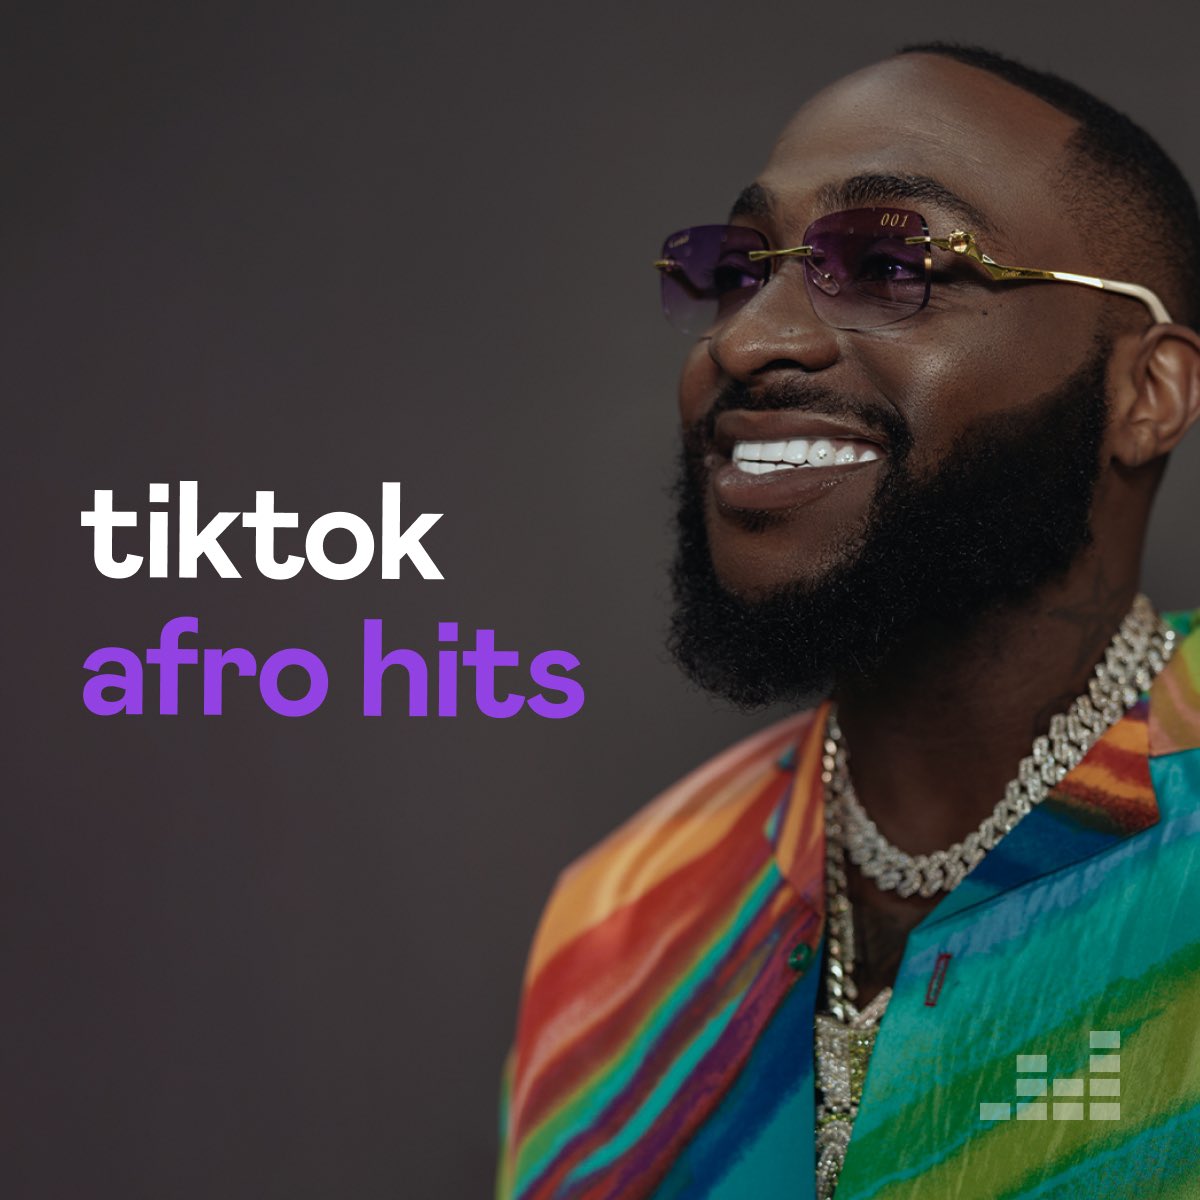 Big love to @Deezer for putting me as the cover on their afro hits playlist ⏳ 

Keep listening to Timeless everywhere 💜

dzr.lnk.to/TikTokAfroHits